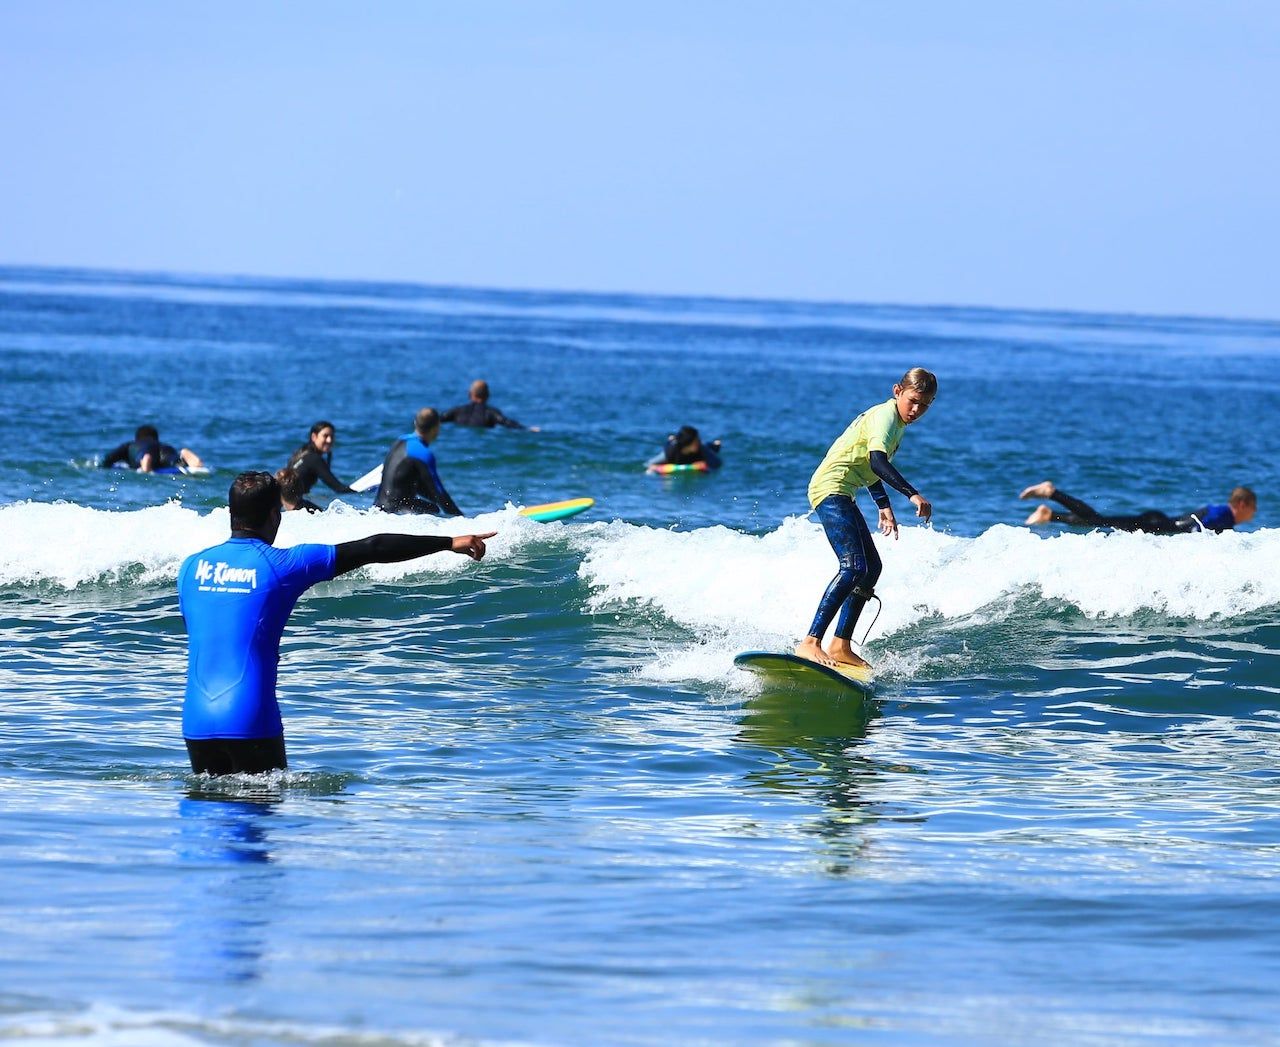 Instructor teaching a surfer